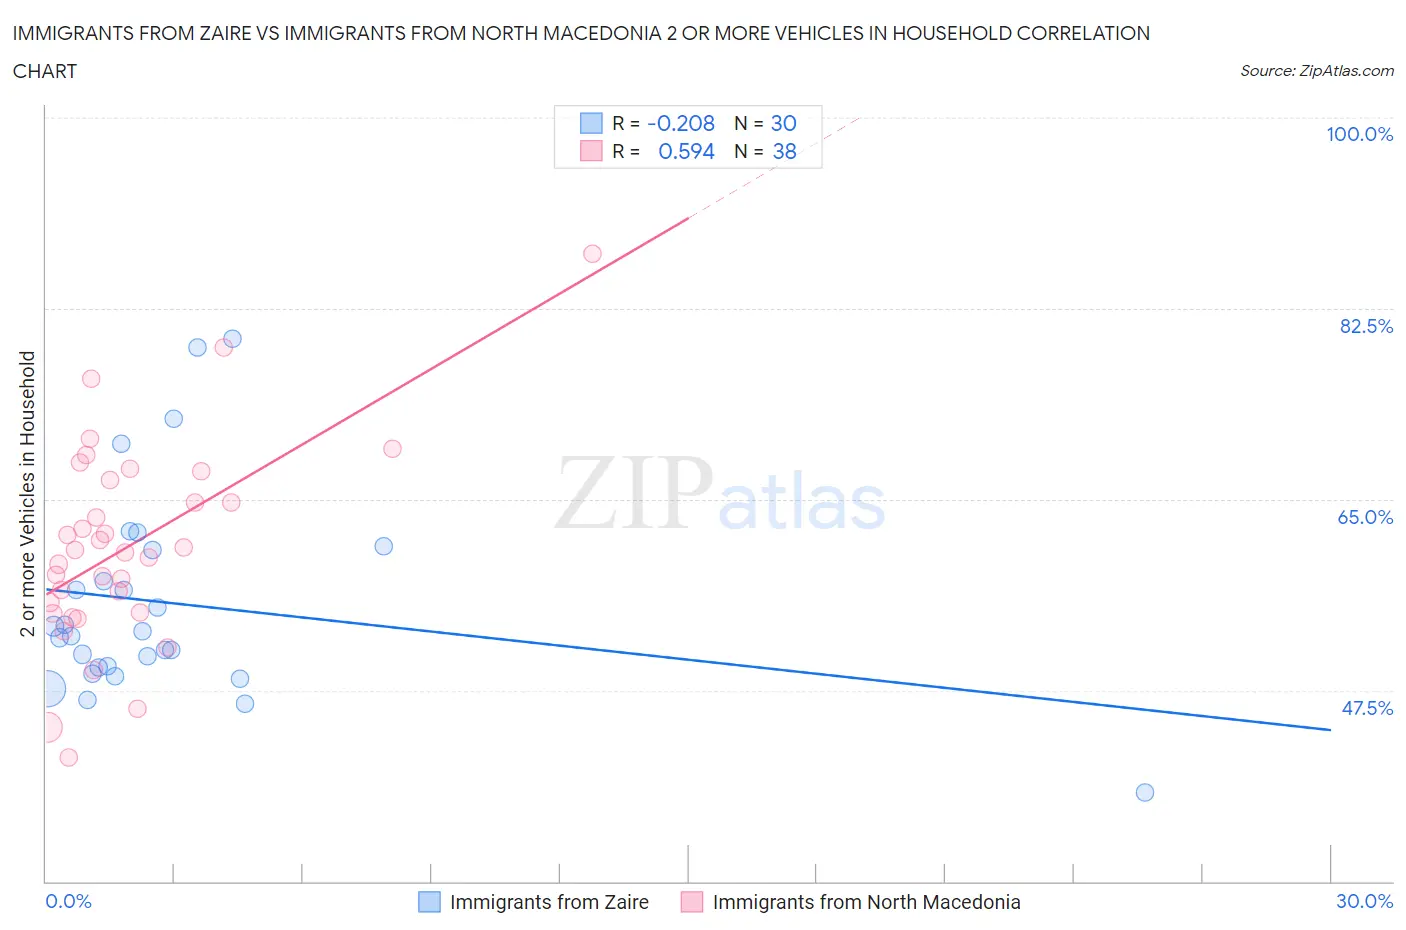 Immigrants from Zaire vs Immigrants from North Macedonia 2 or more Vehicles in Household